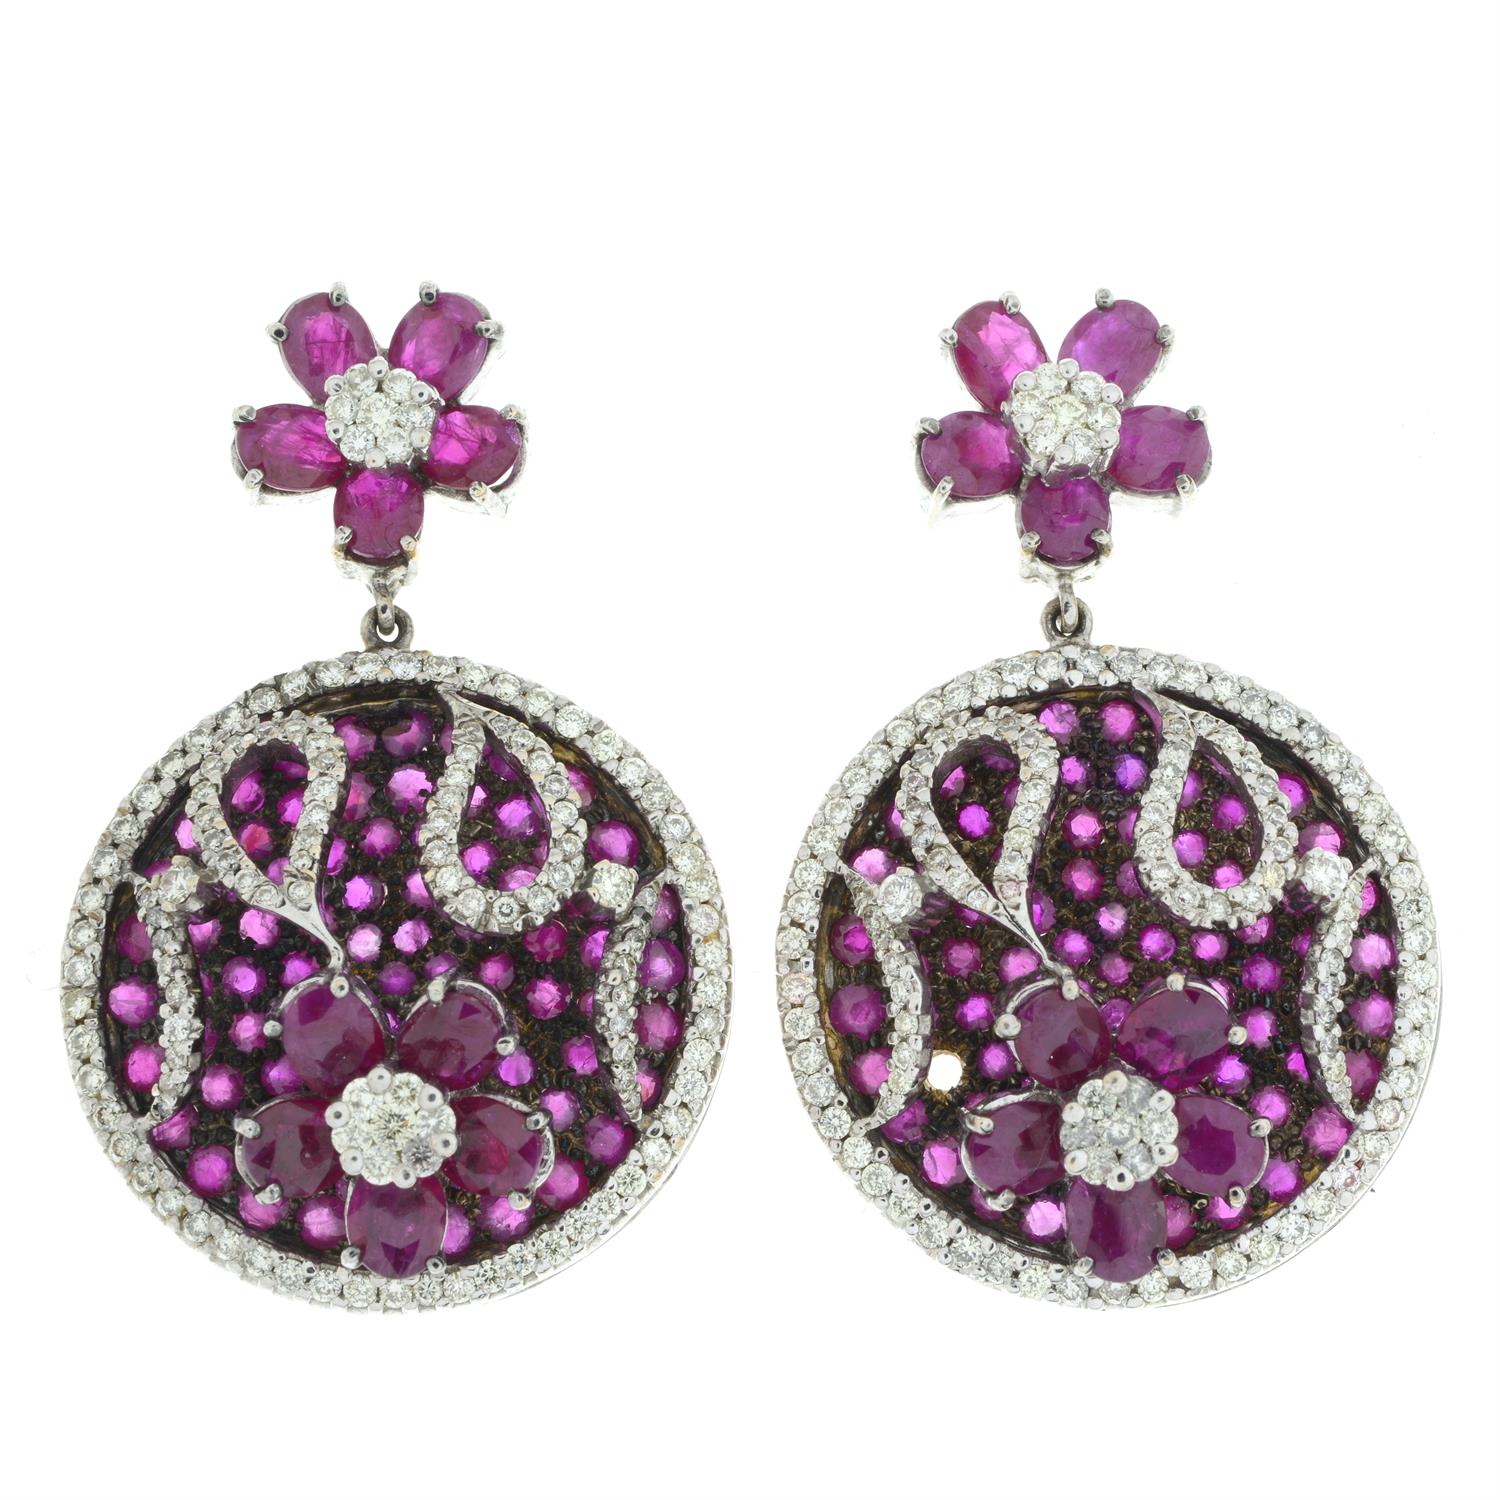 Ruby and diamond floral earrings - Image 2 of 4